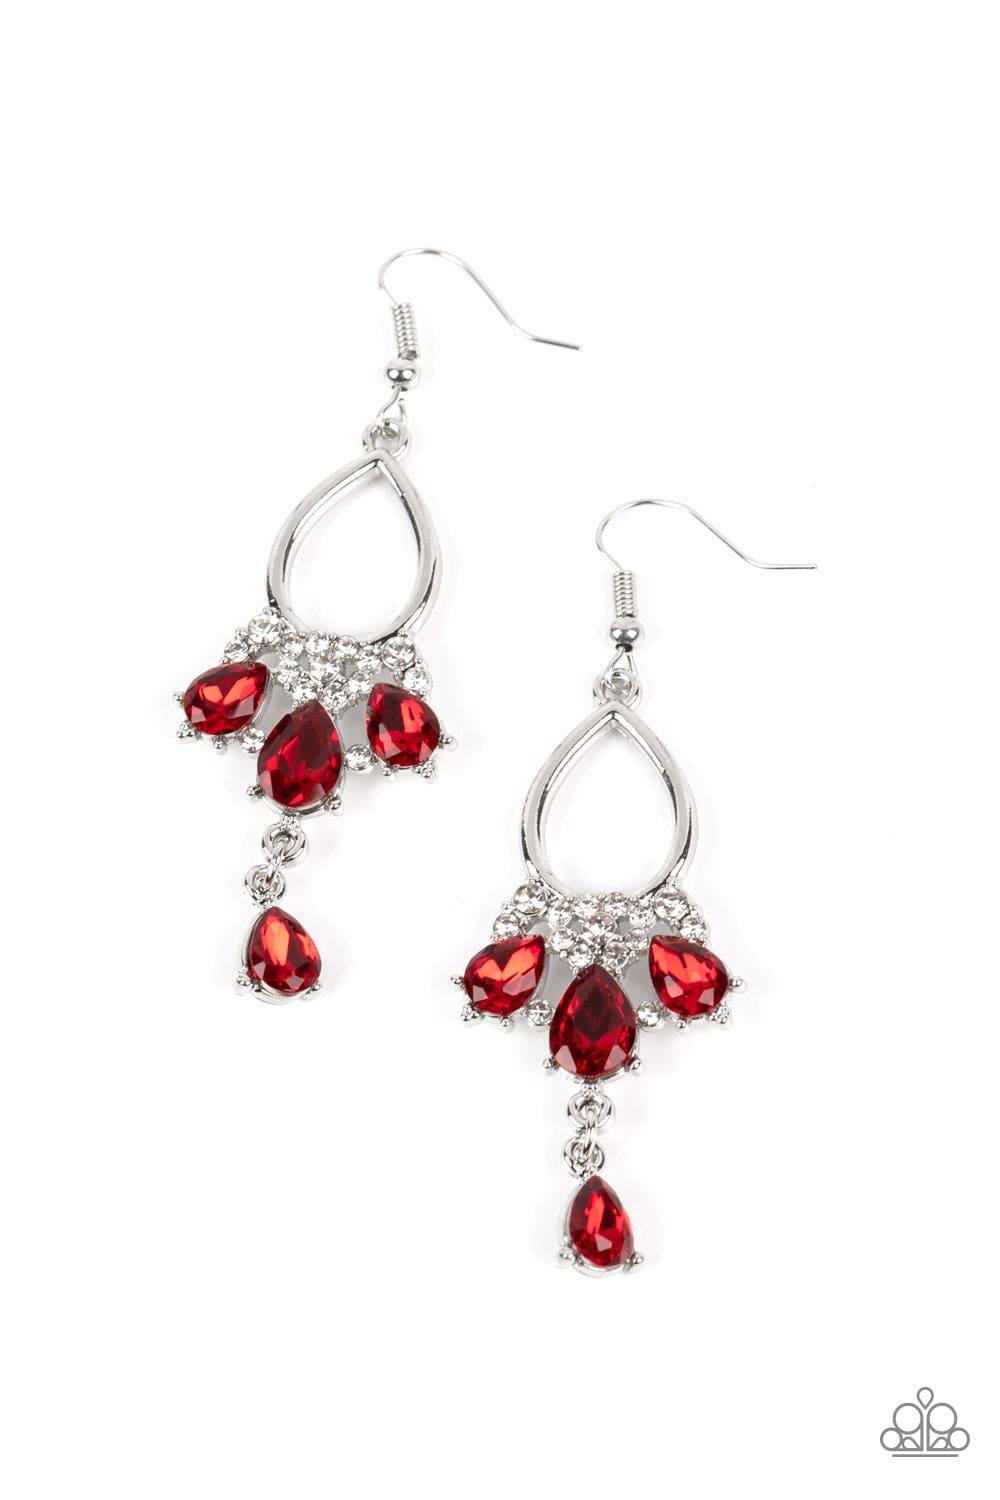 Paparazzi Accessories - Coming In Clutch - Red Earrings - Bling by JessieK